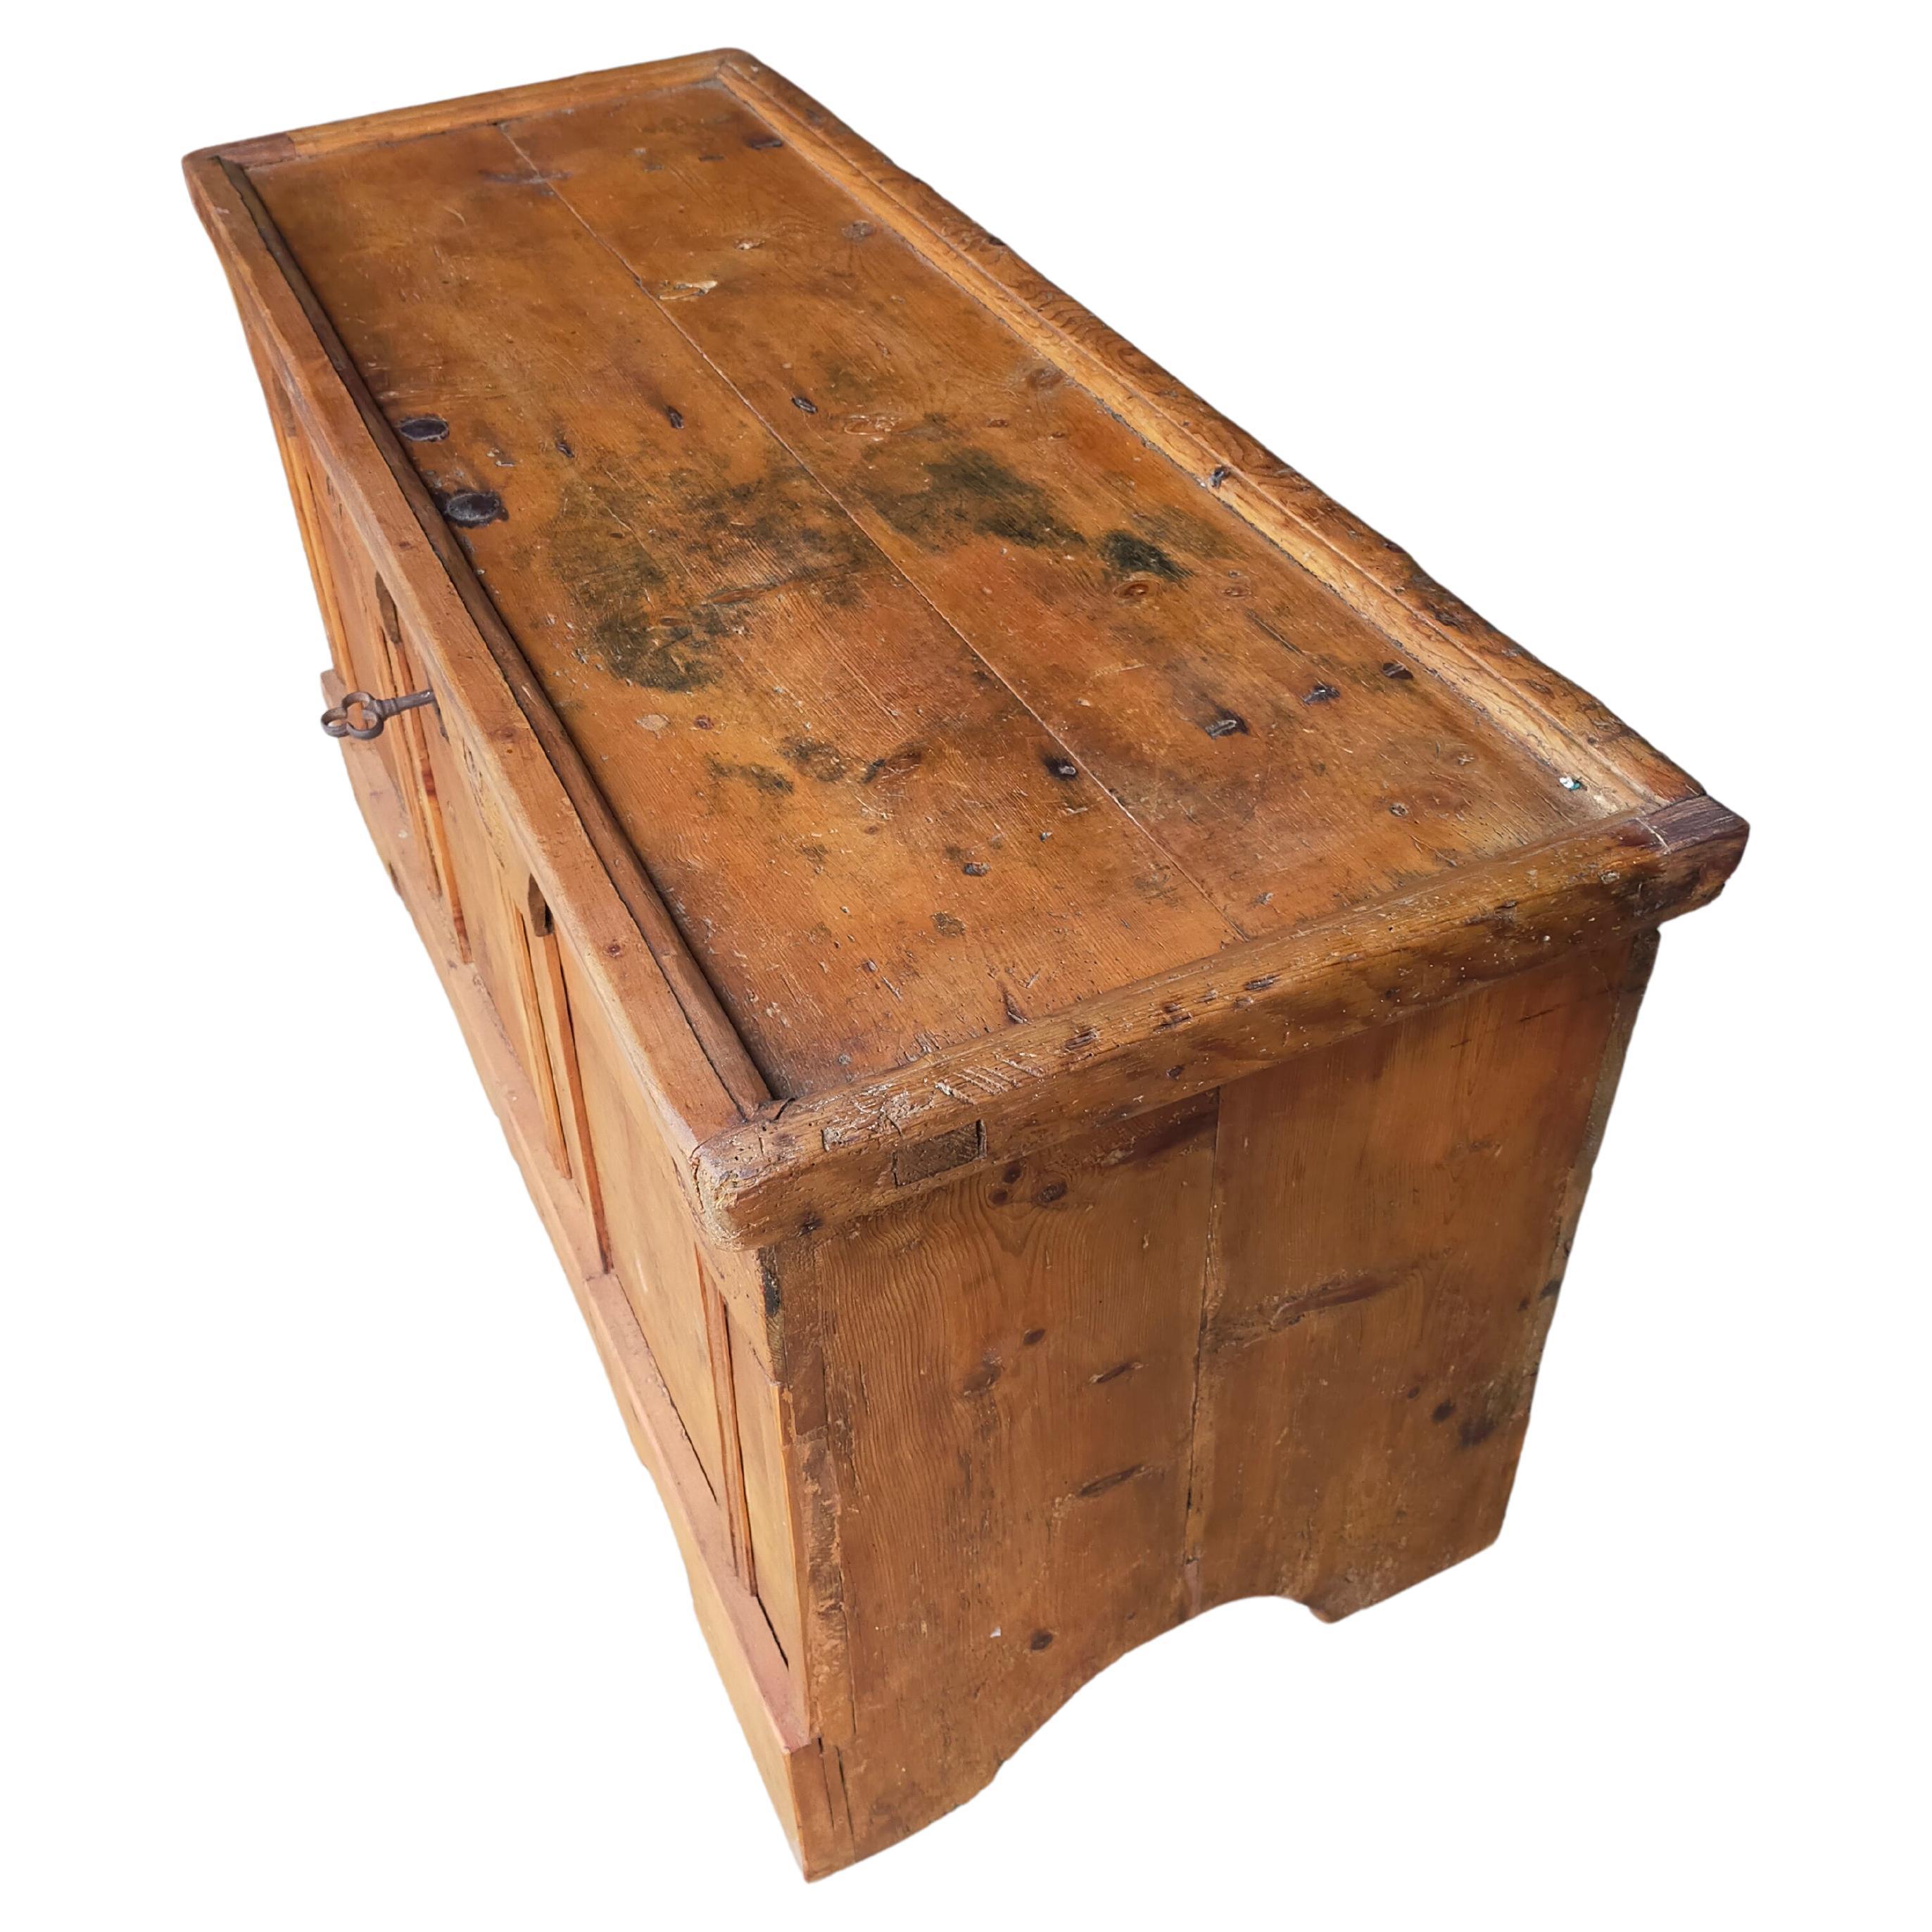 Stone pine wedding chest, up to the 1700s For Sale